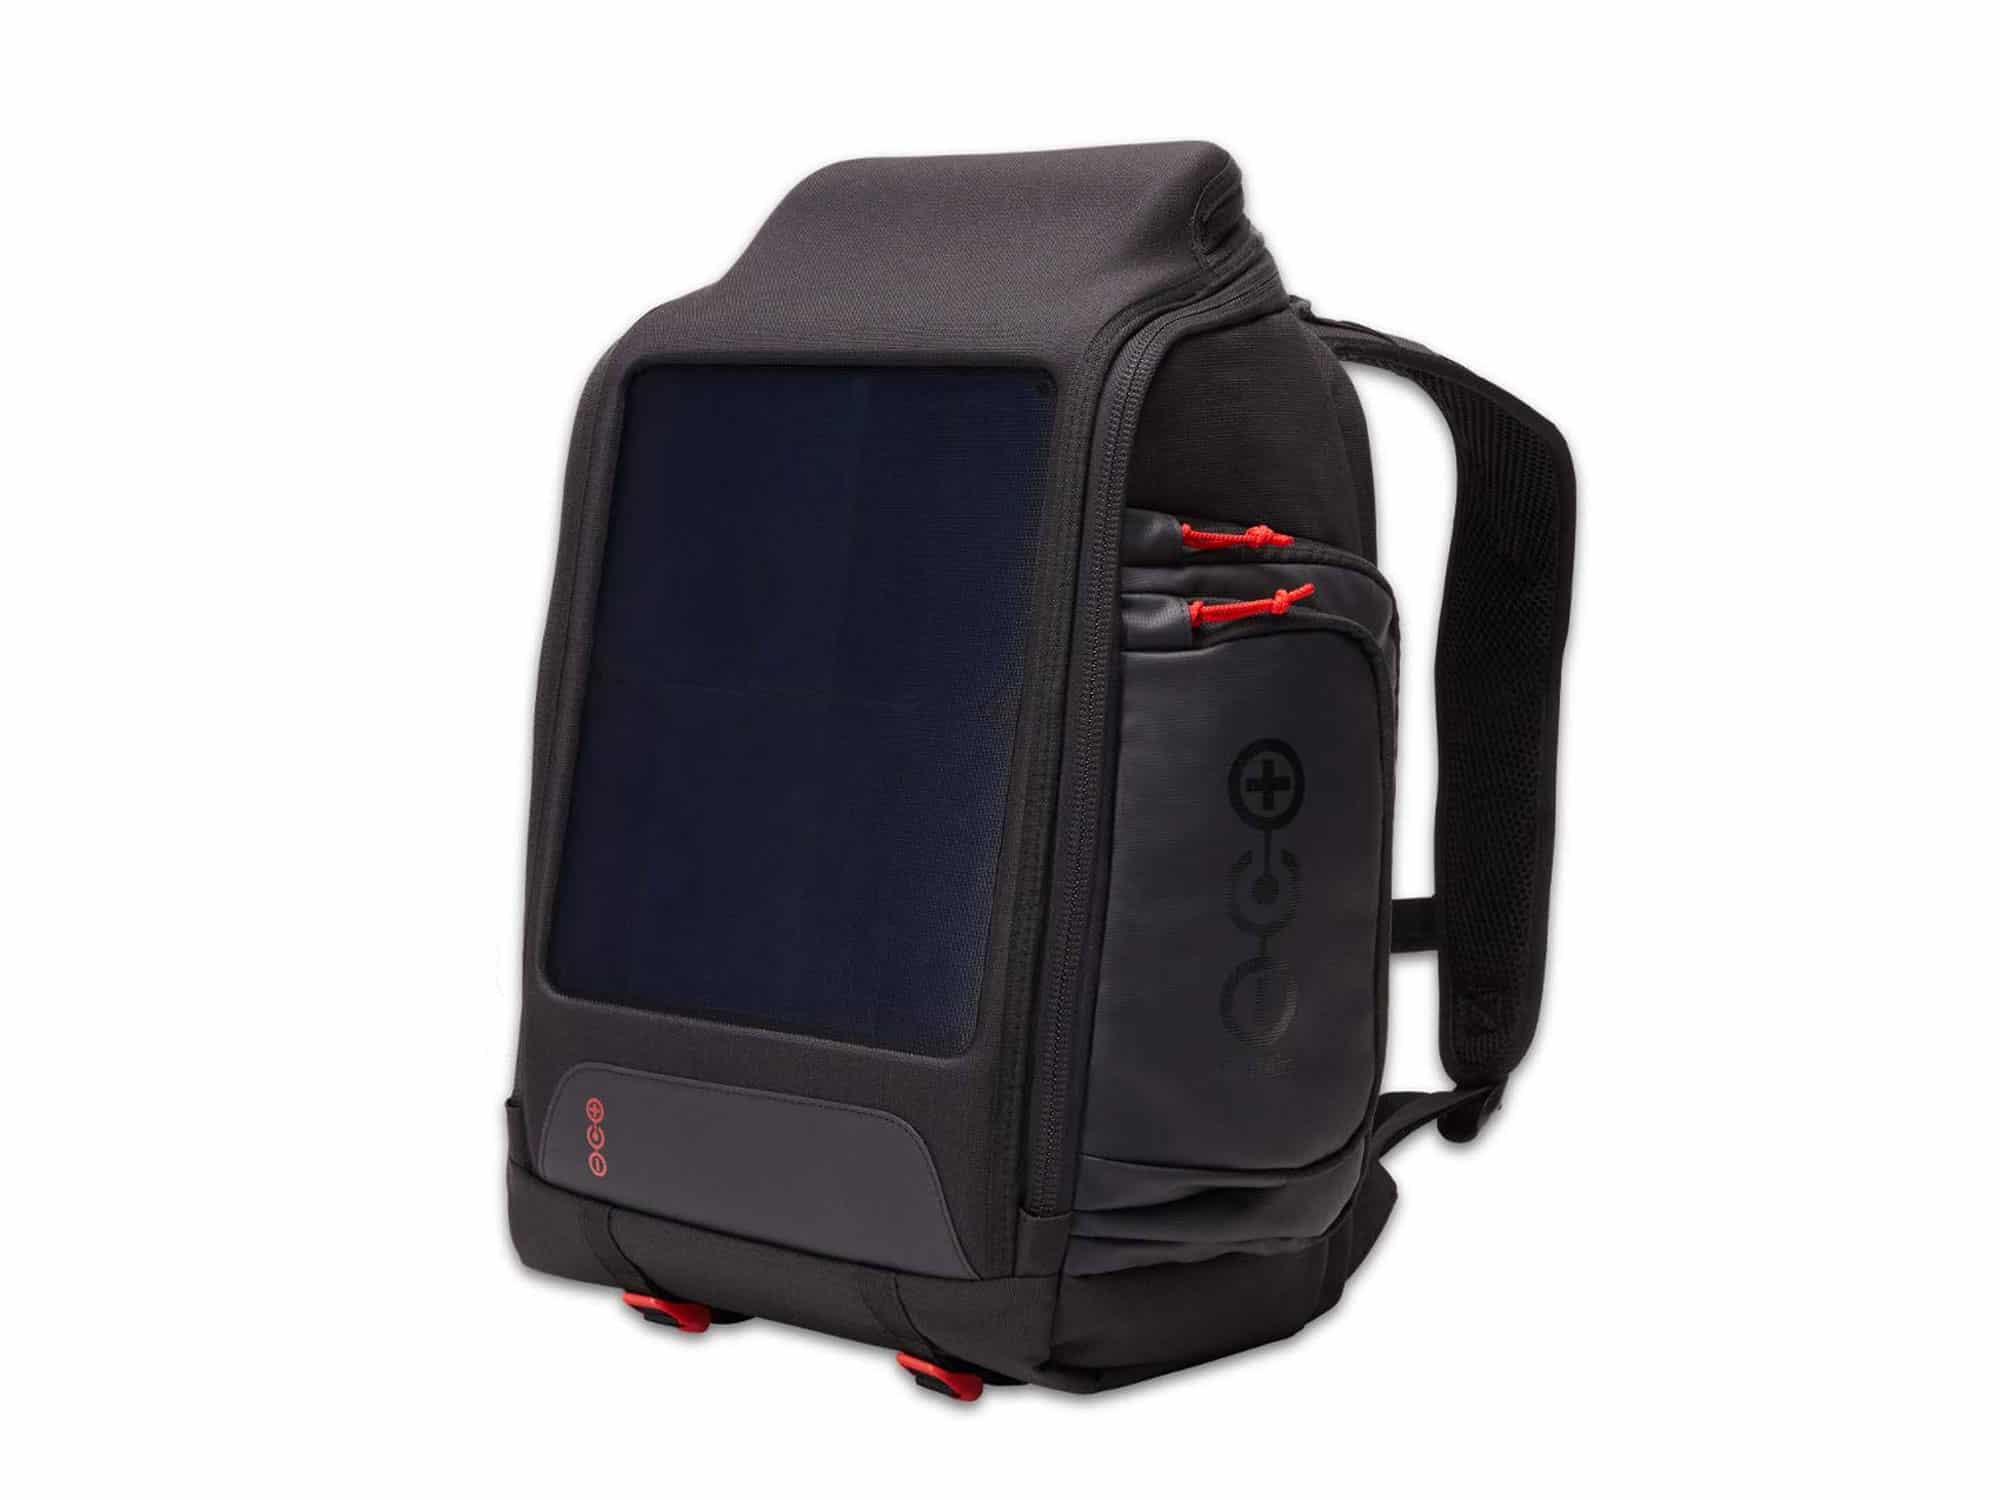 Voltaic Systems OffGrid 10 Watt Rapid Solar Backpack Charger